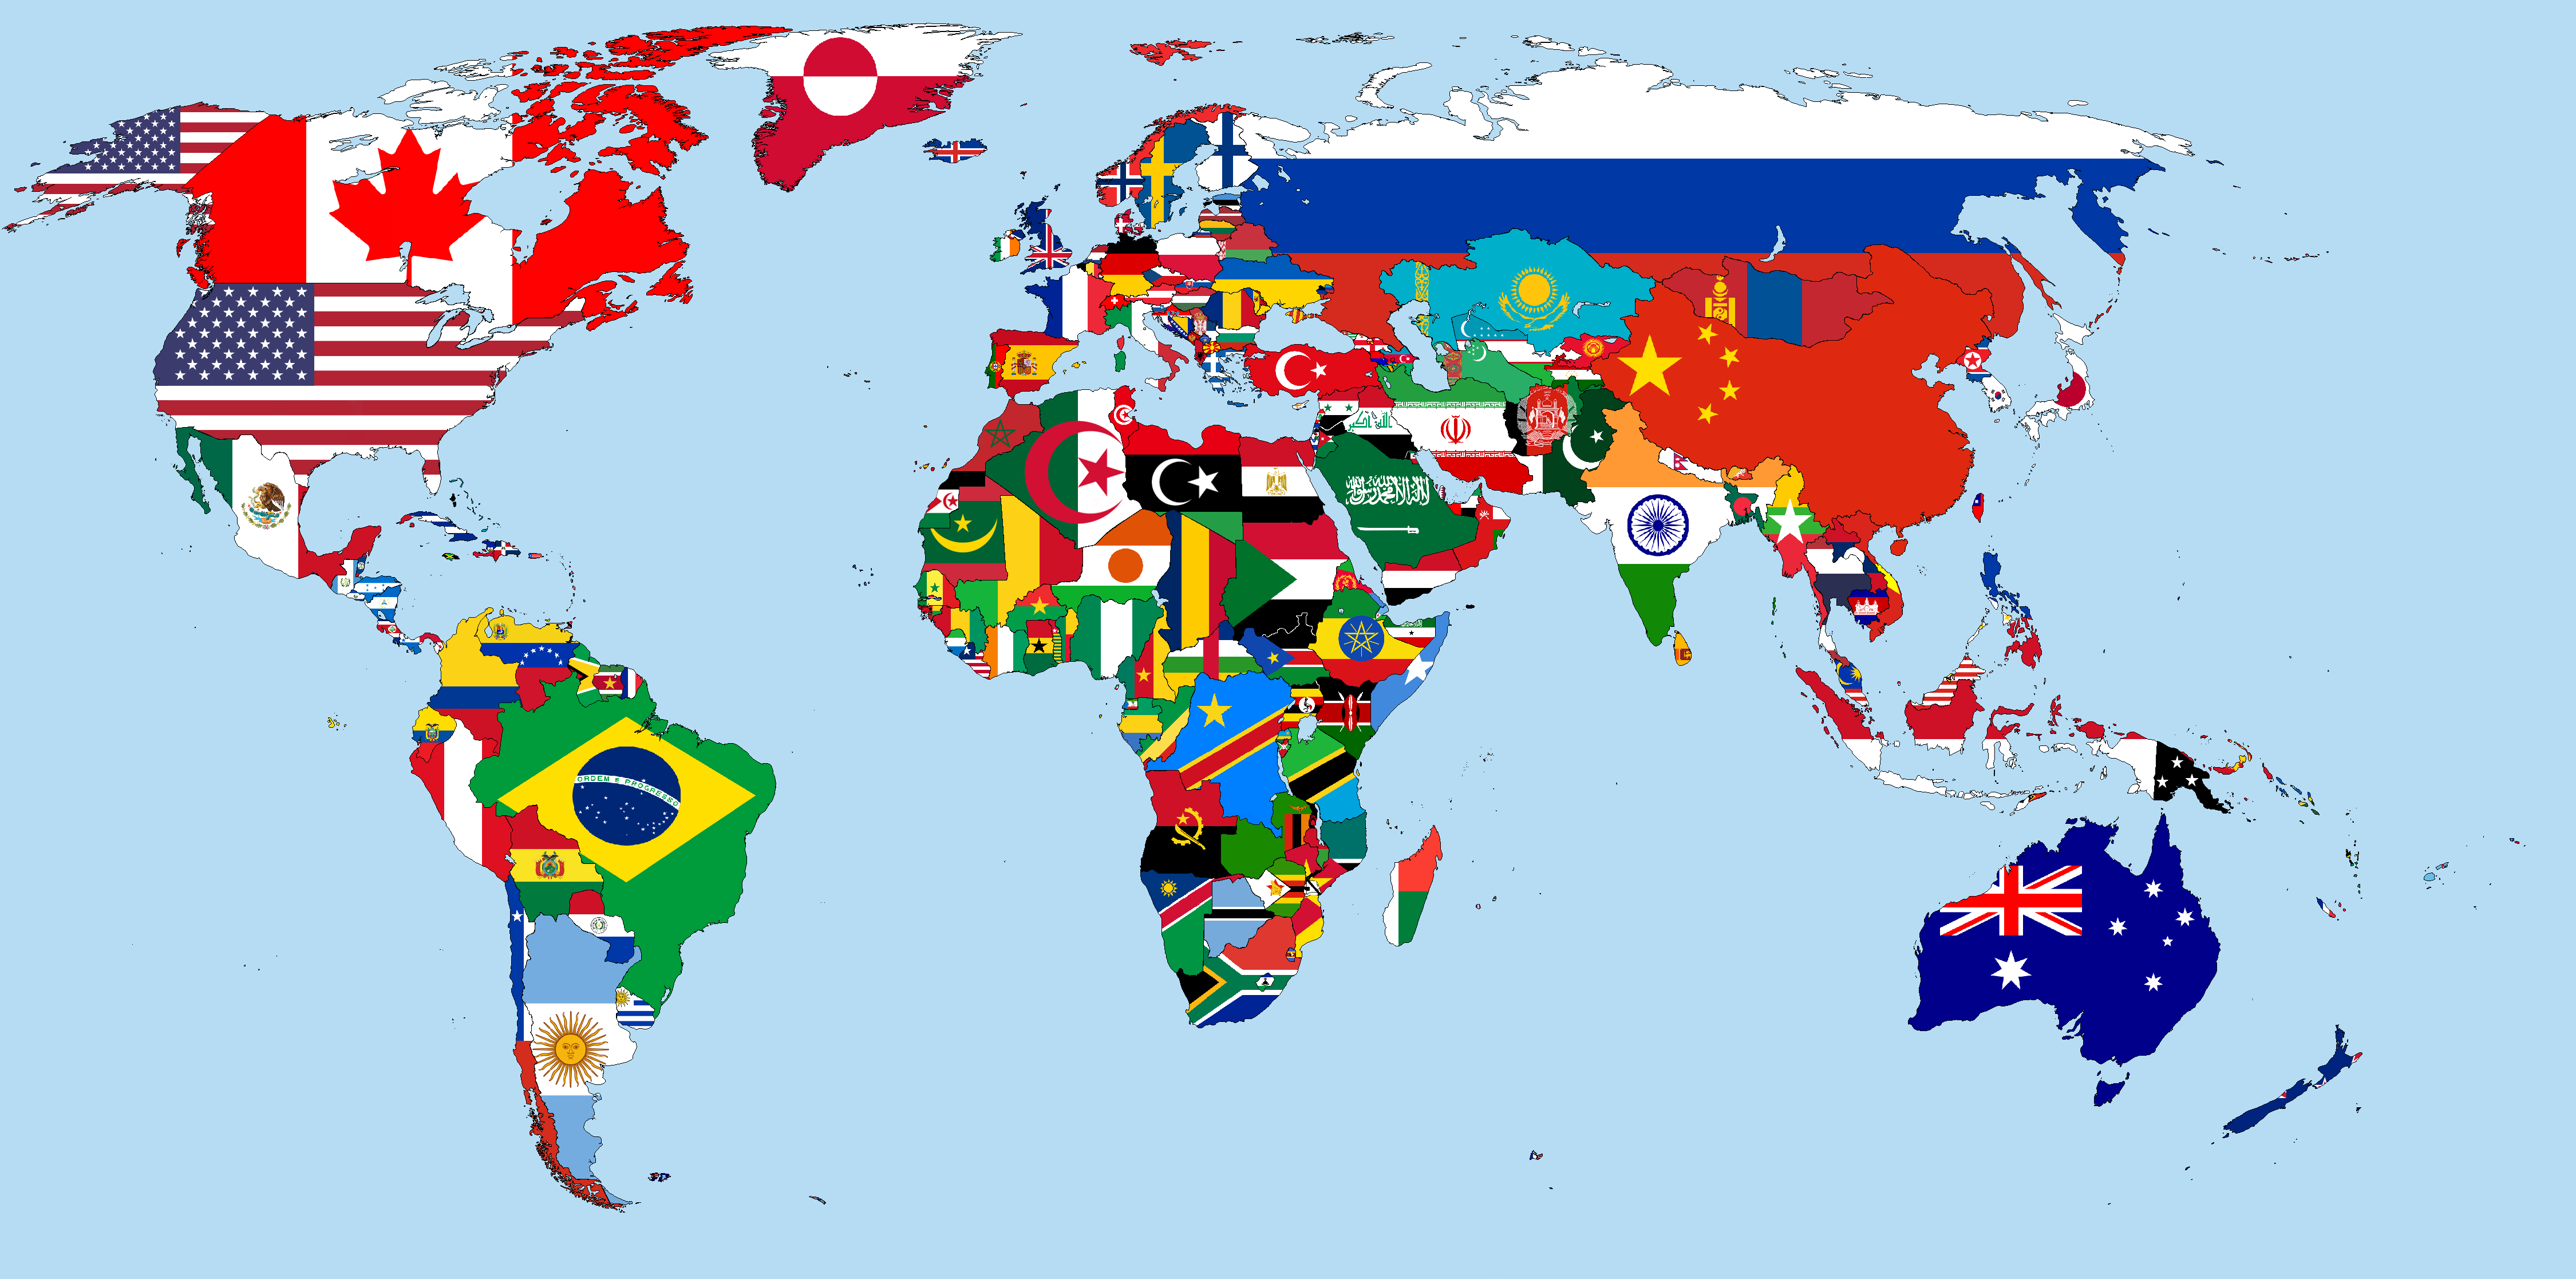 A world map with flags of different countries.